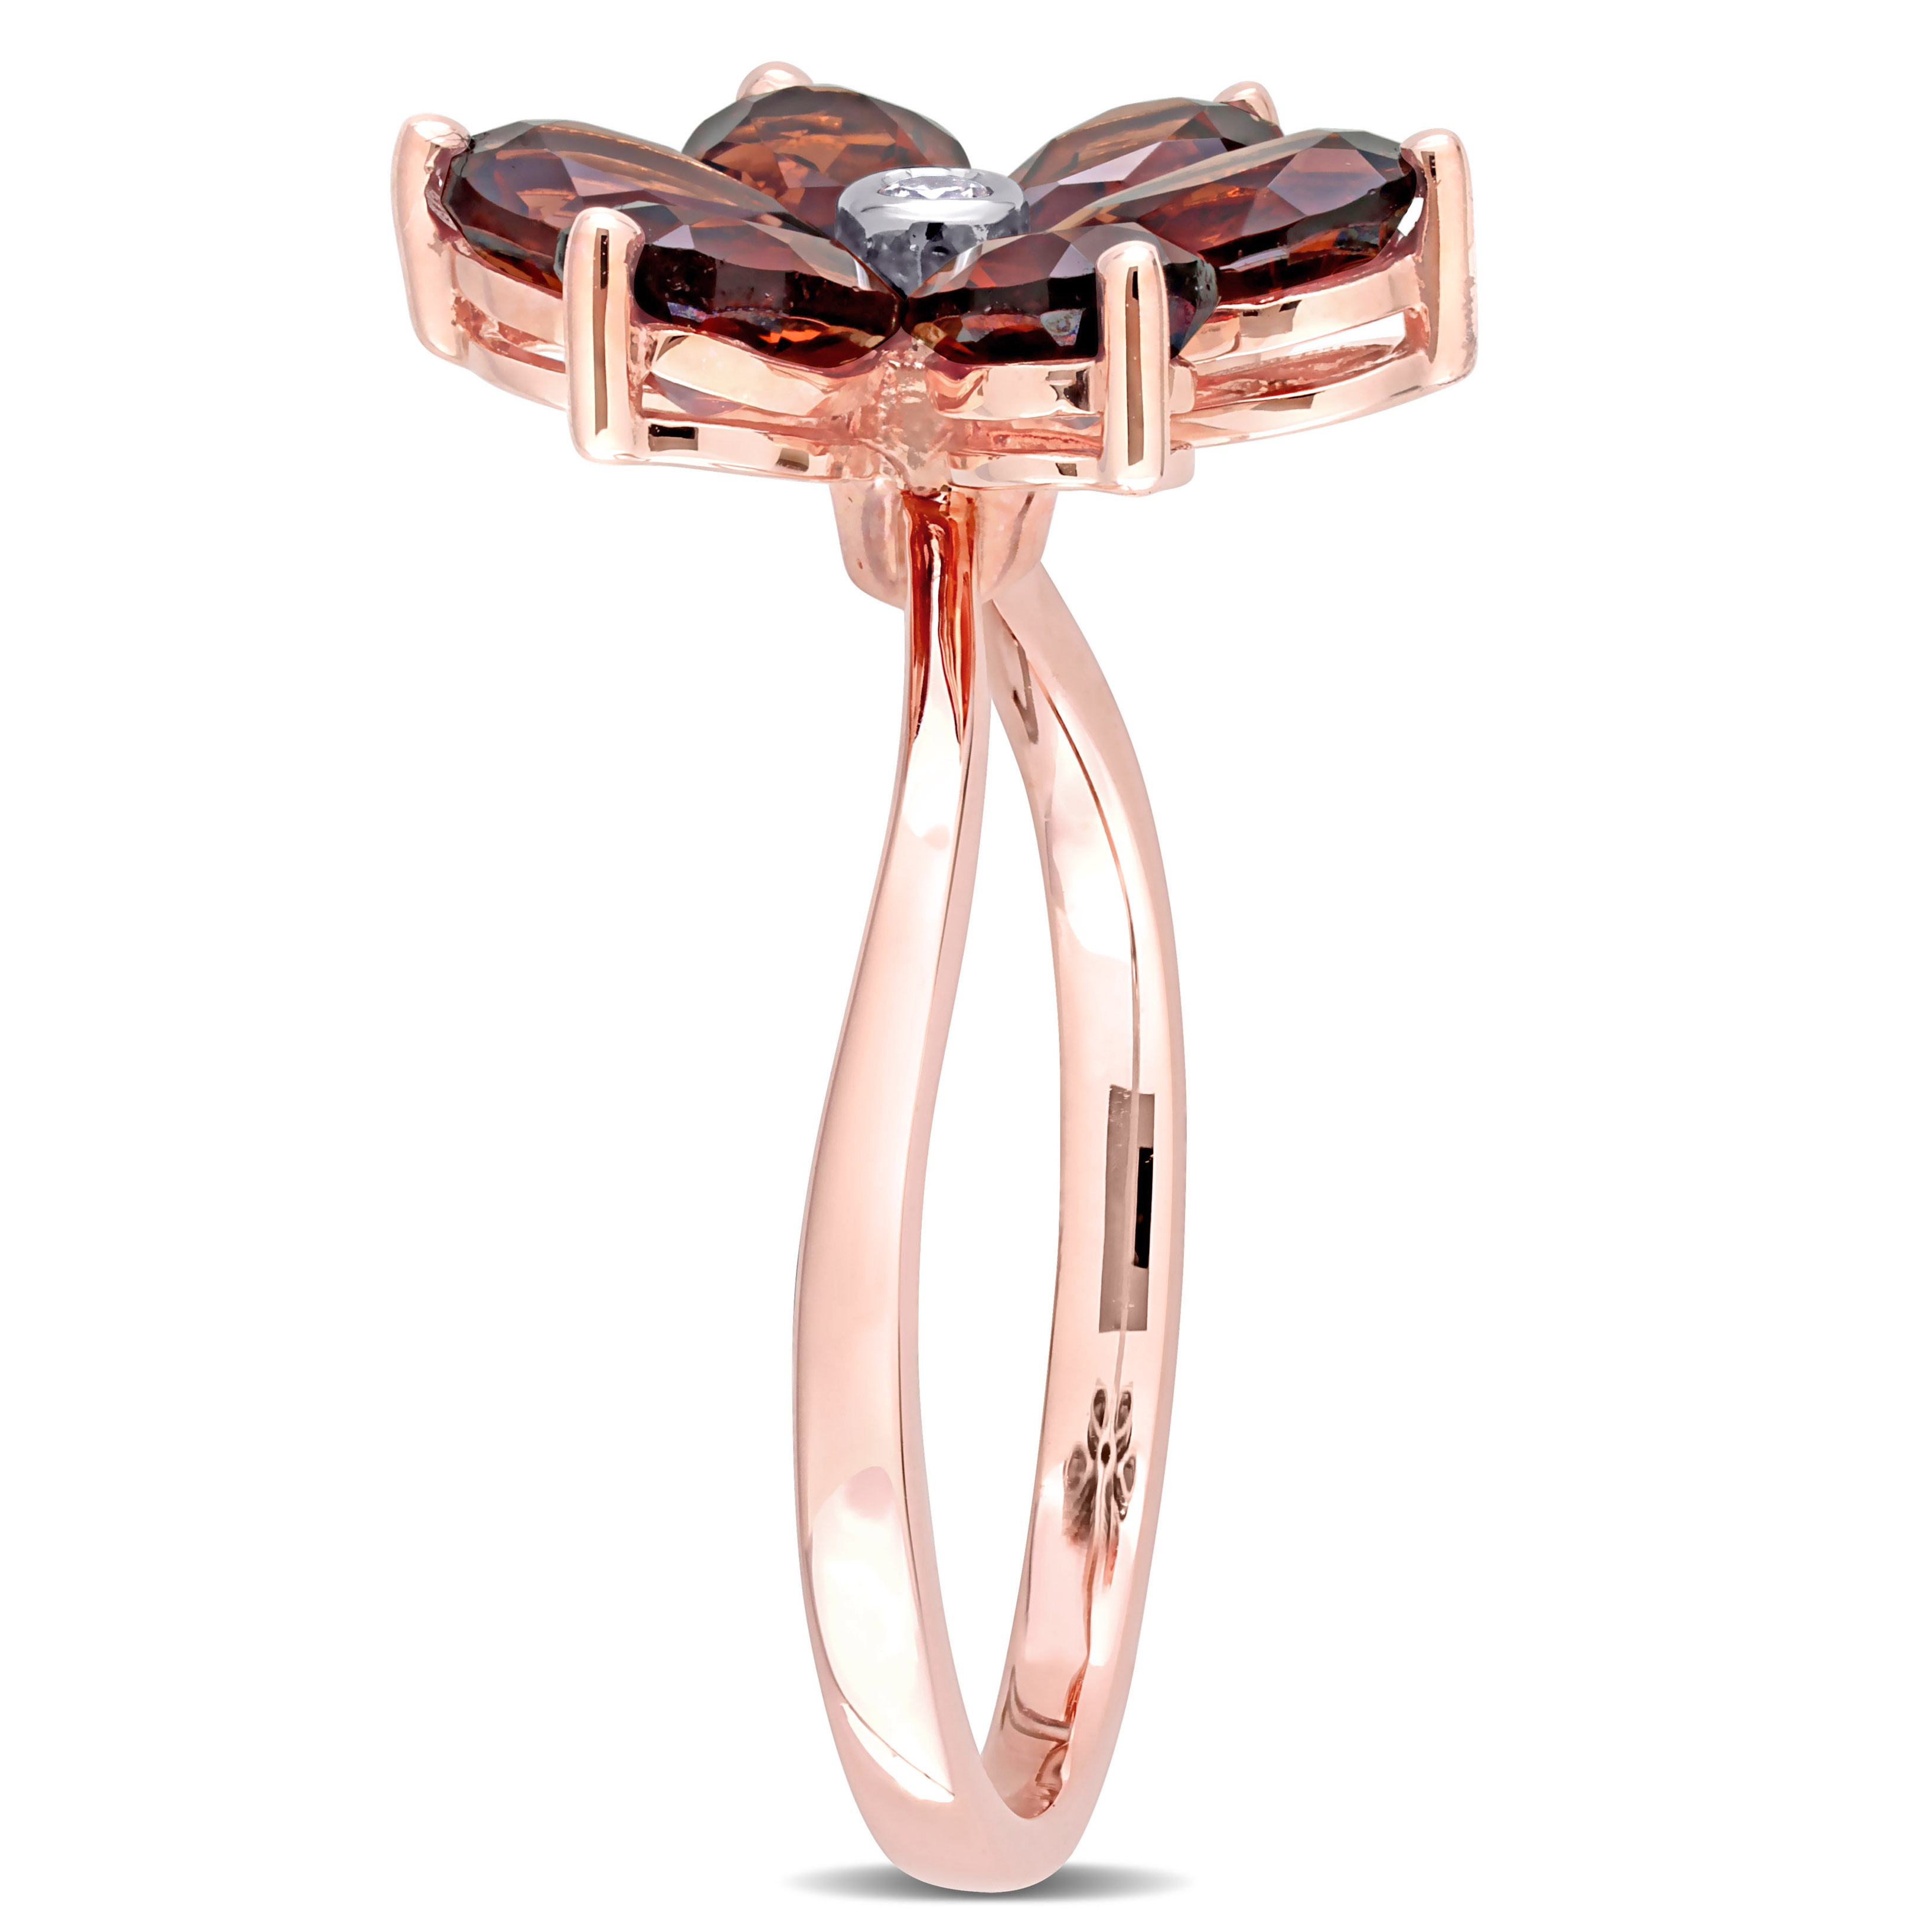 3 CT TGW Garnet and Diamond Accent Floral Ring in 10k Rose Gold